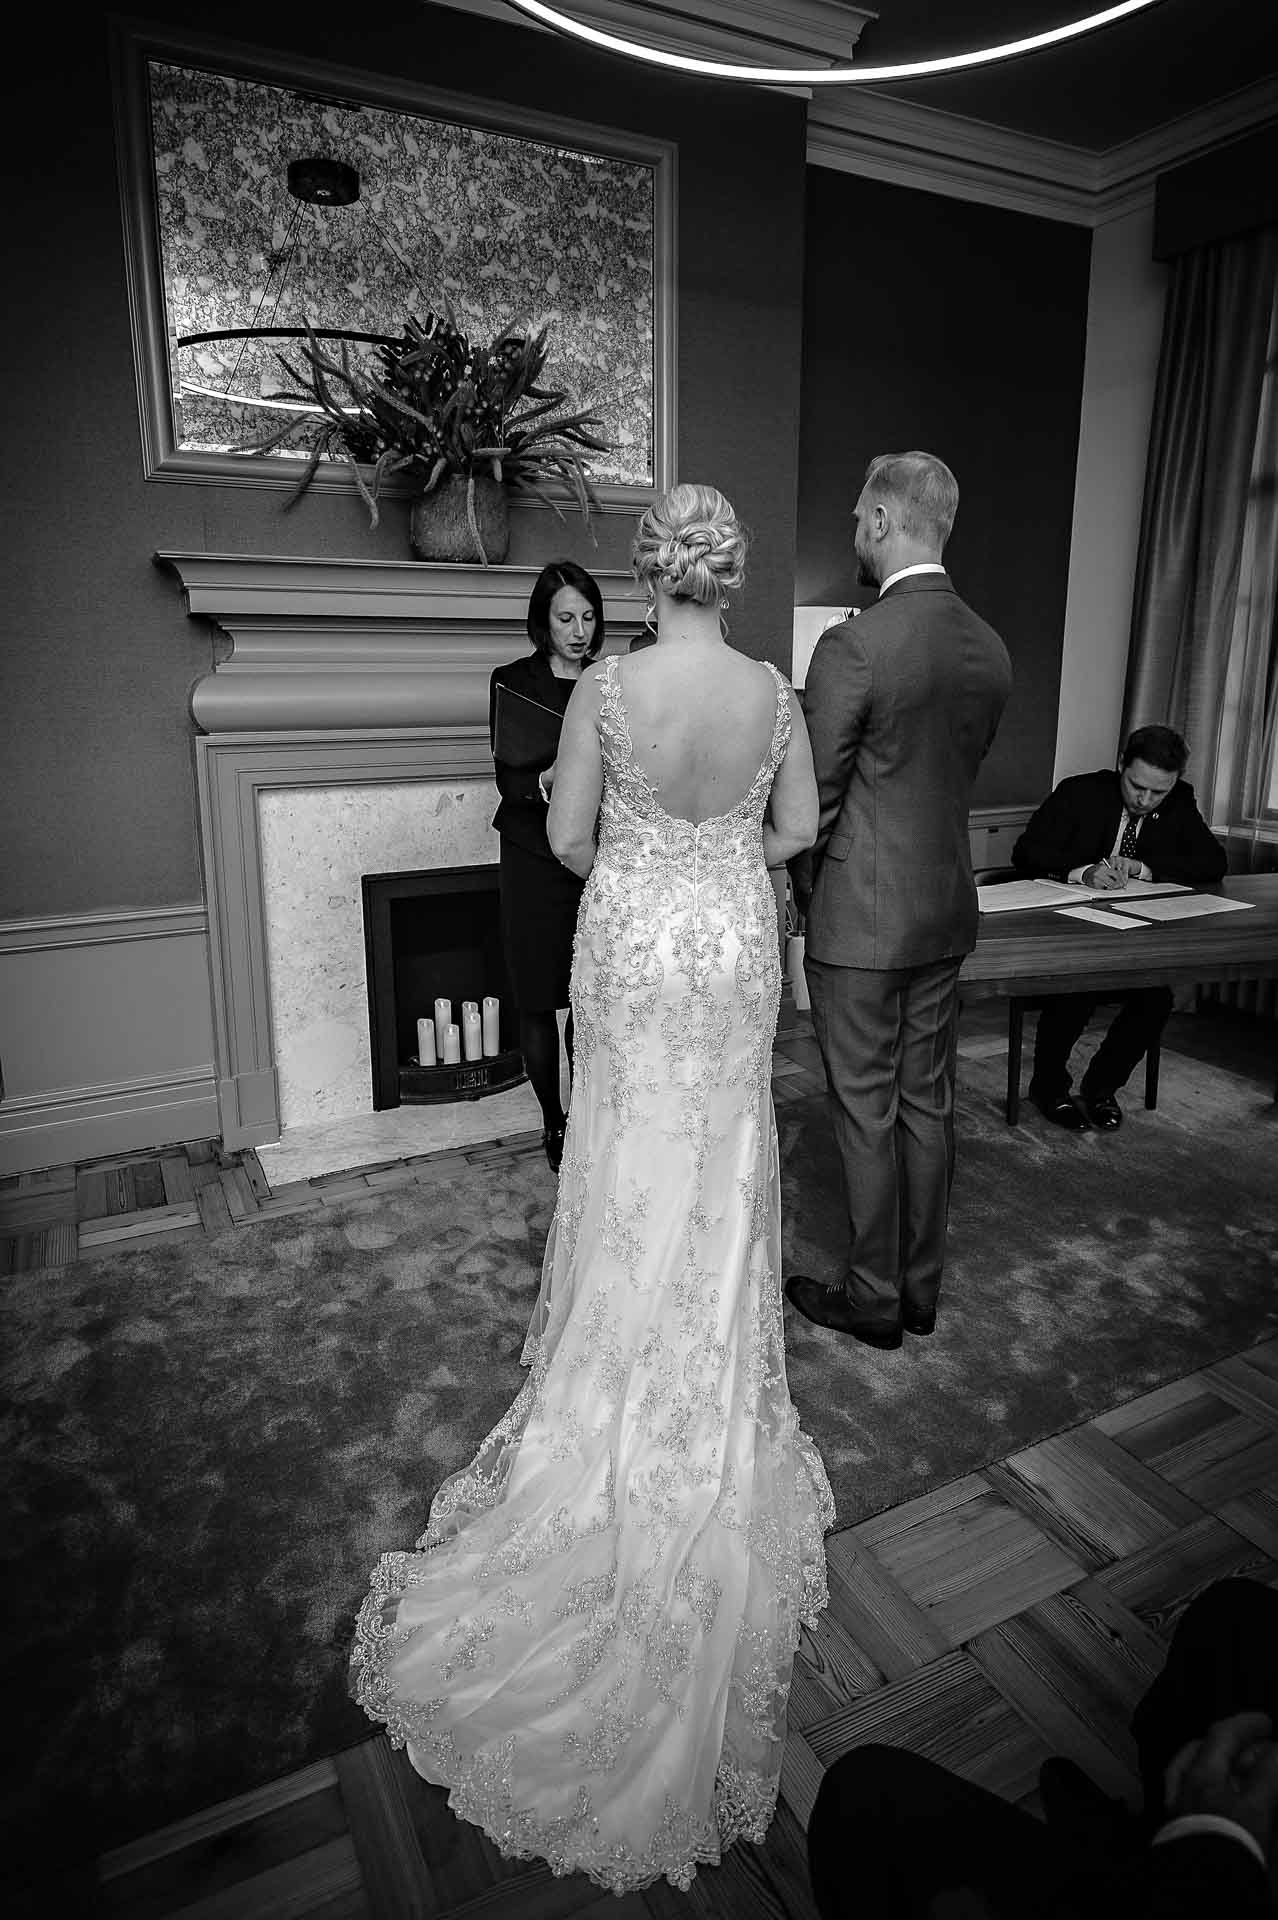 Back shot of bride and groom at wedding ceremony